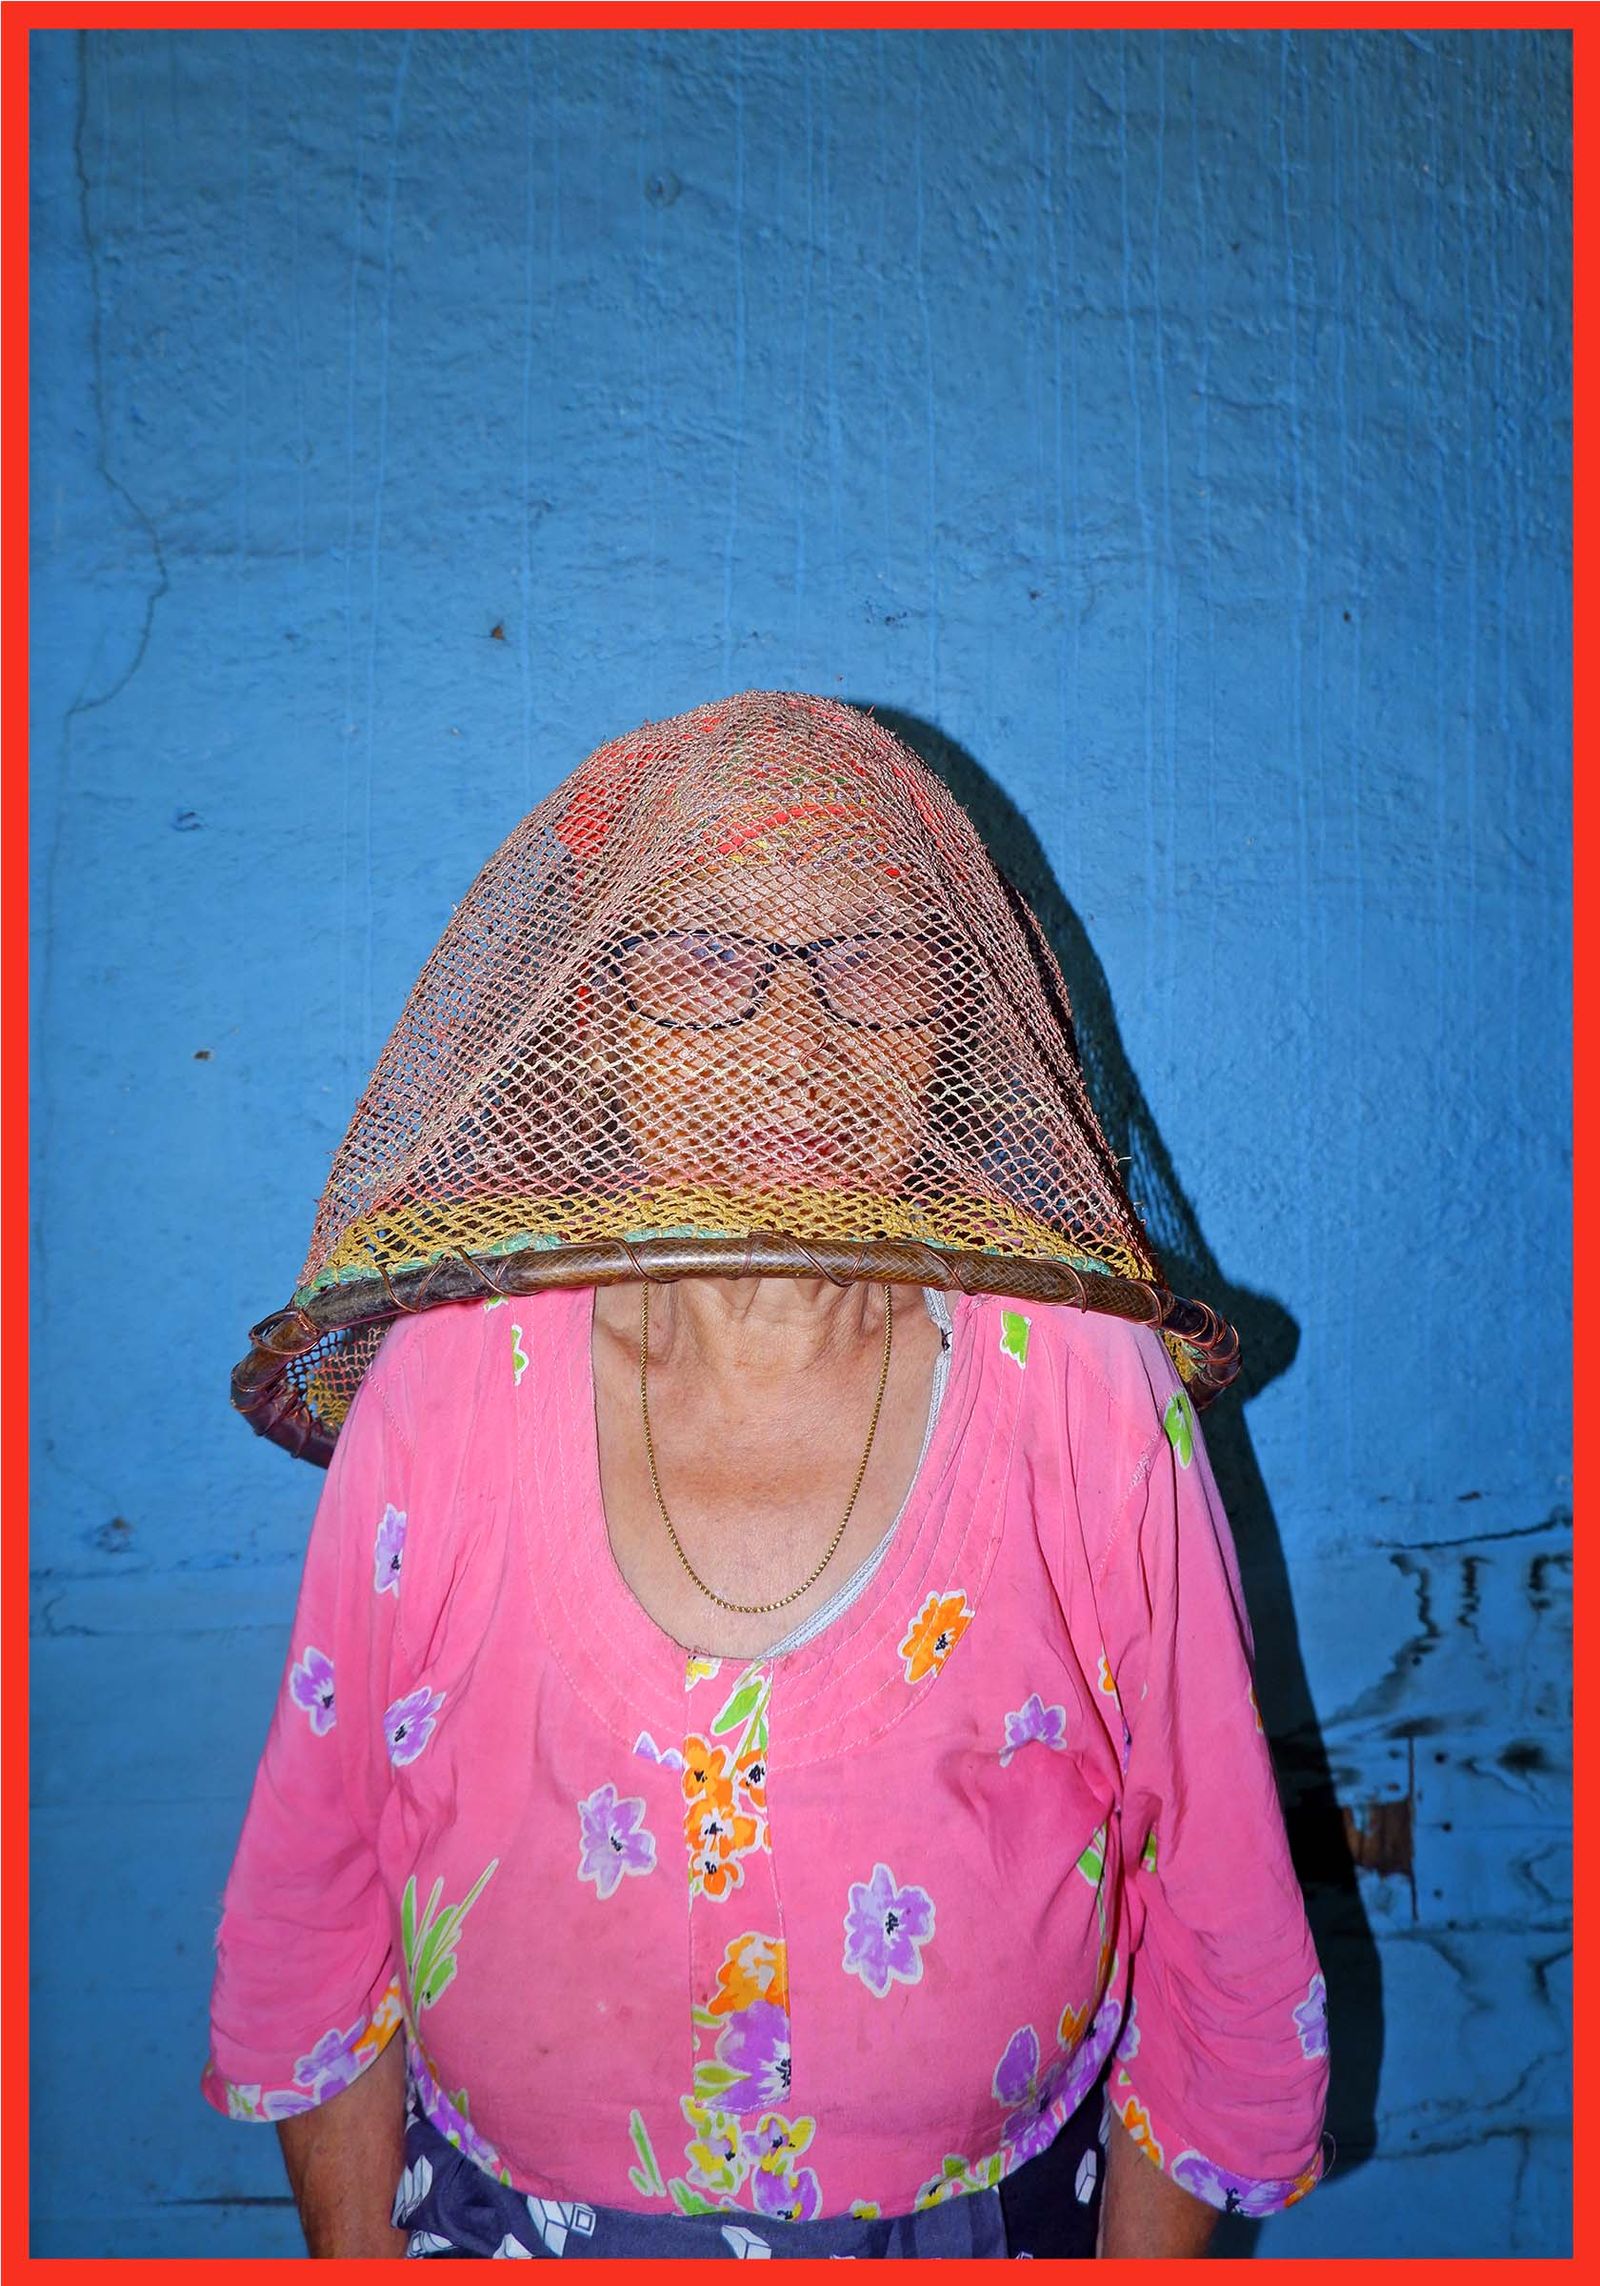 © Chingrimi Shimray - Fish net. Hand knotted by Api (grandmother) during her short stay at her daughter's in the city. Marou ,India (August 2021)